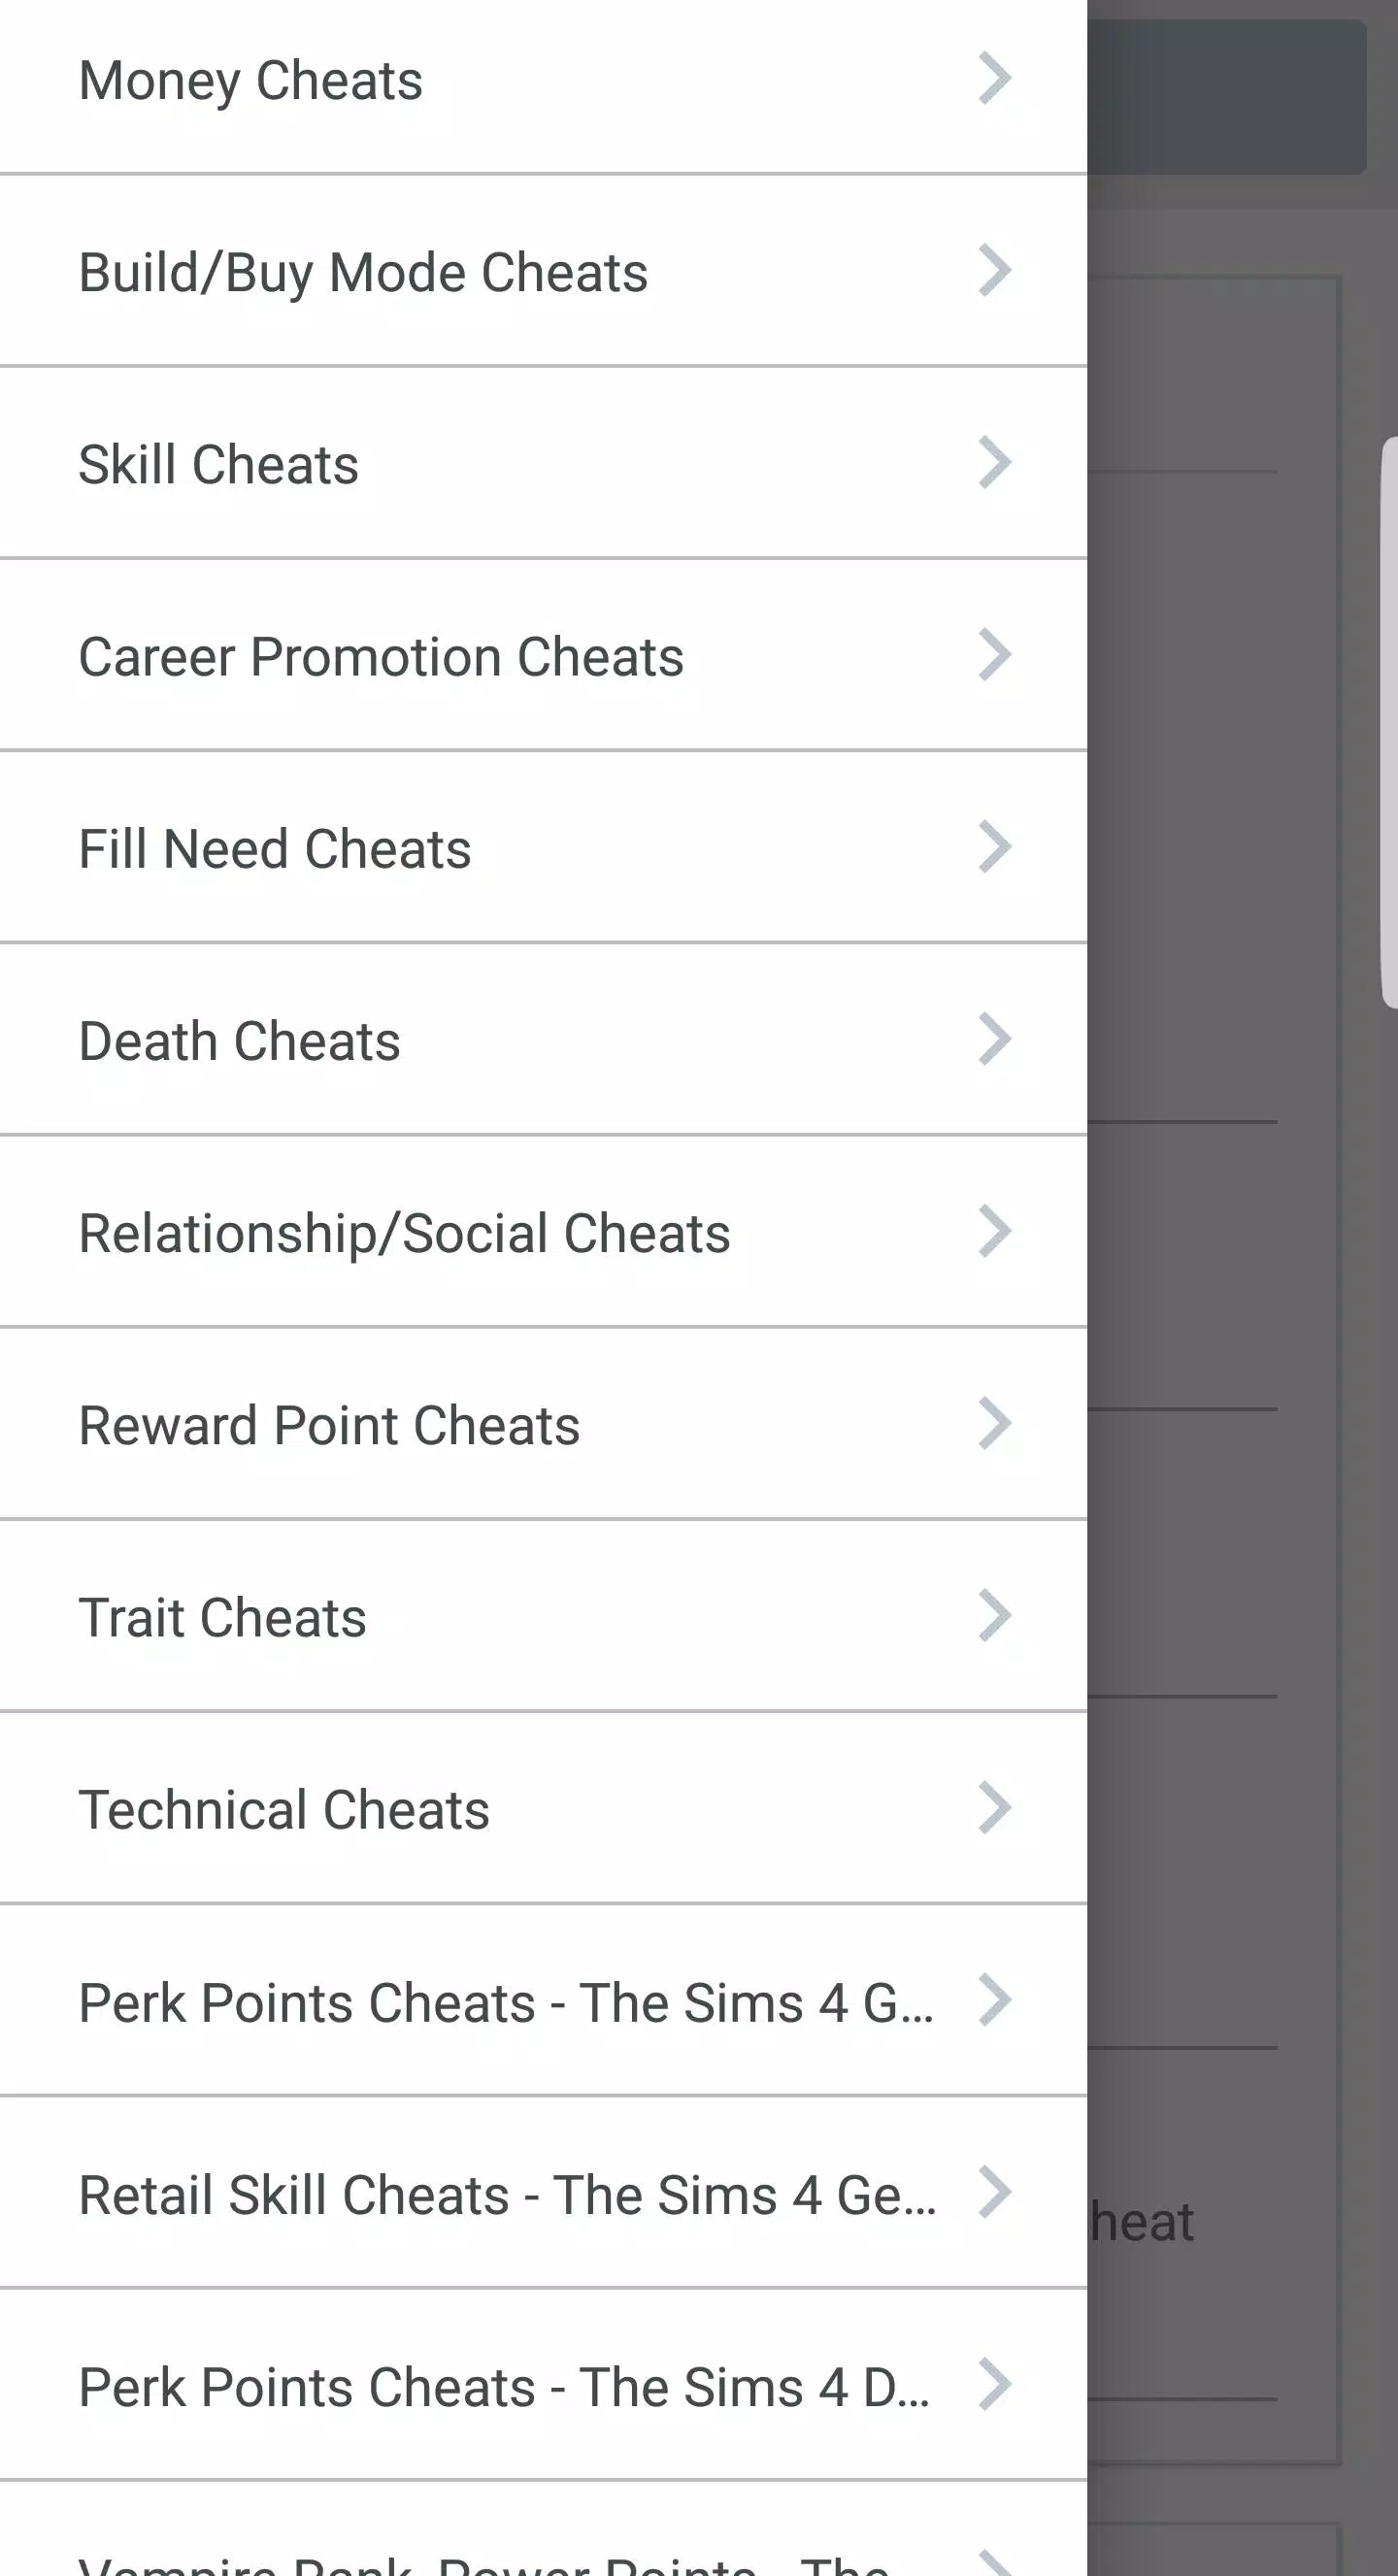 Cheats for Sims 4 (Cheat codes & Guides) by Zakaria Ajaboud